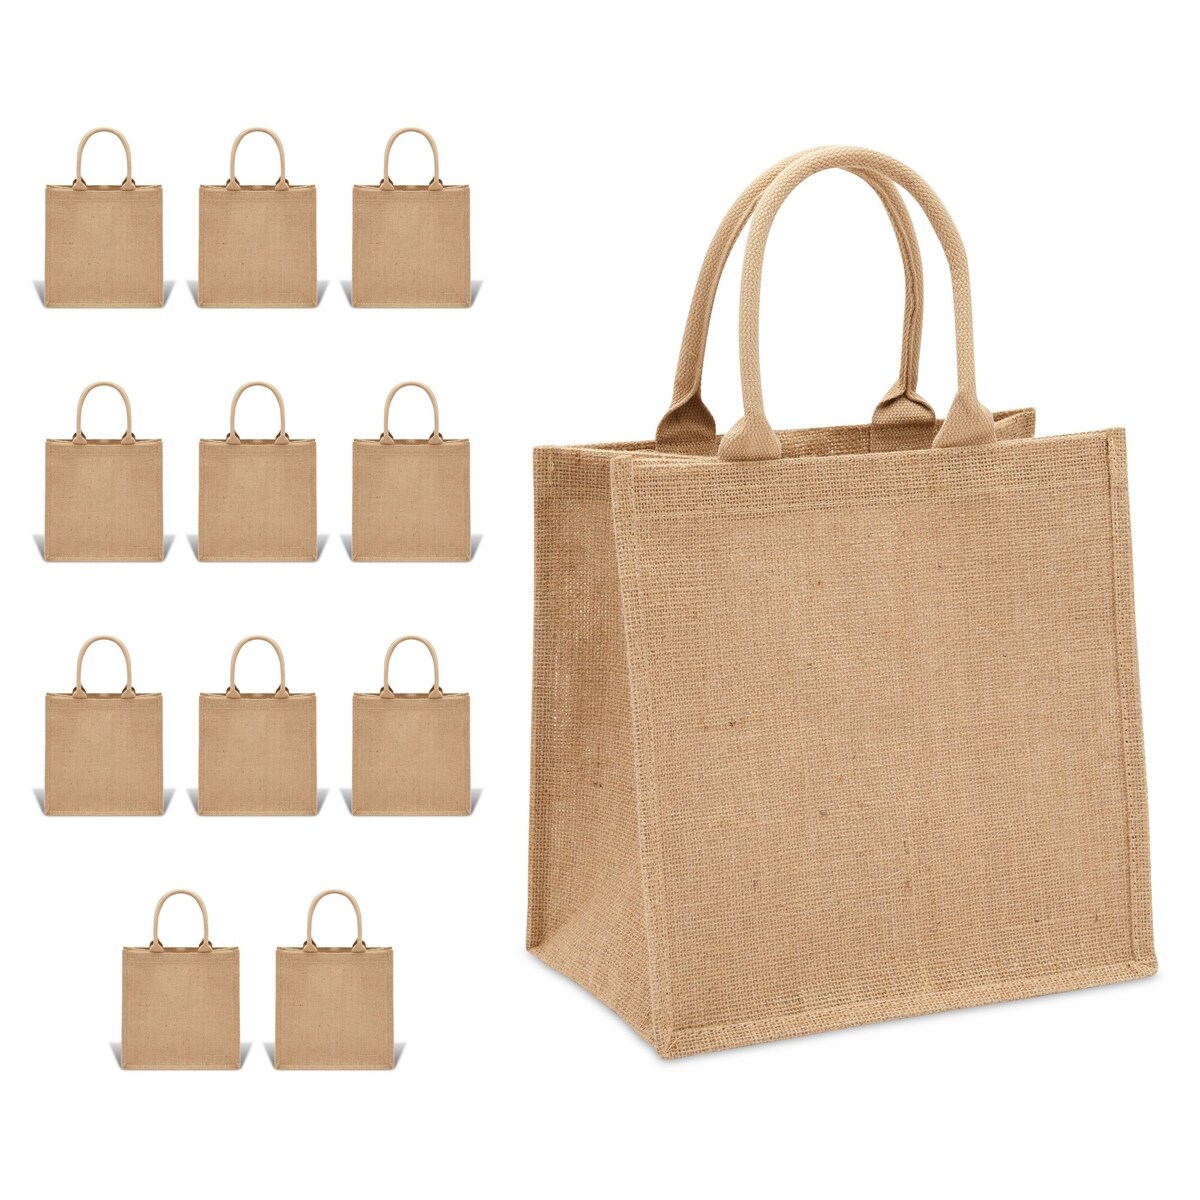 Jute Burlap Tote Bag Featuring A Henry James Quote